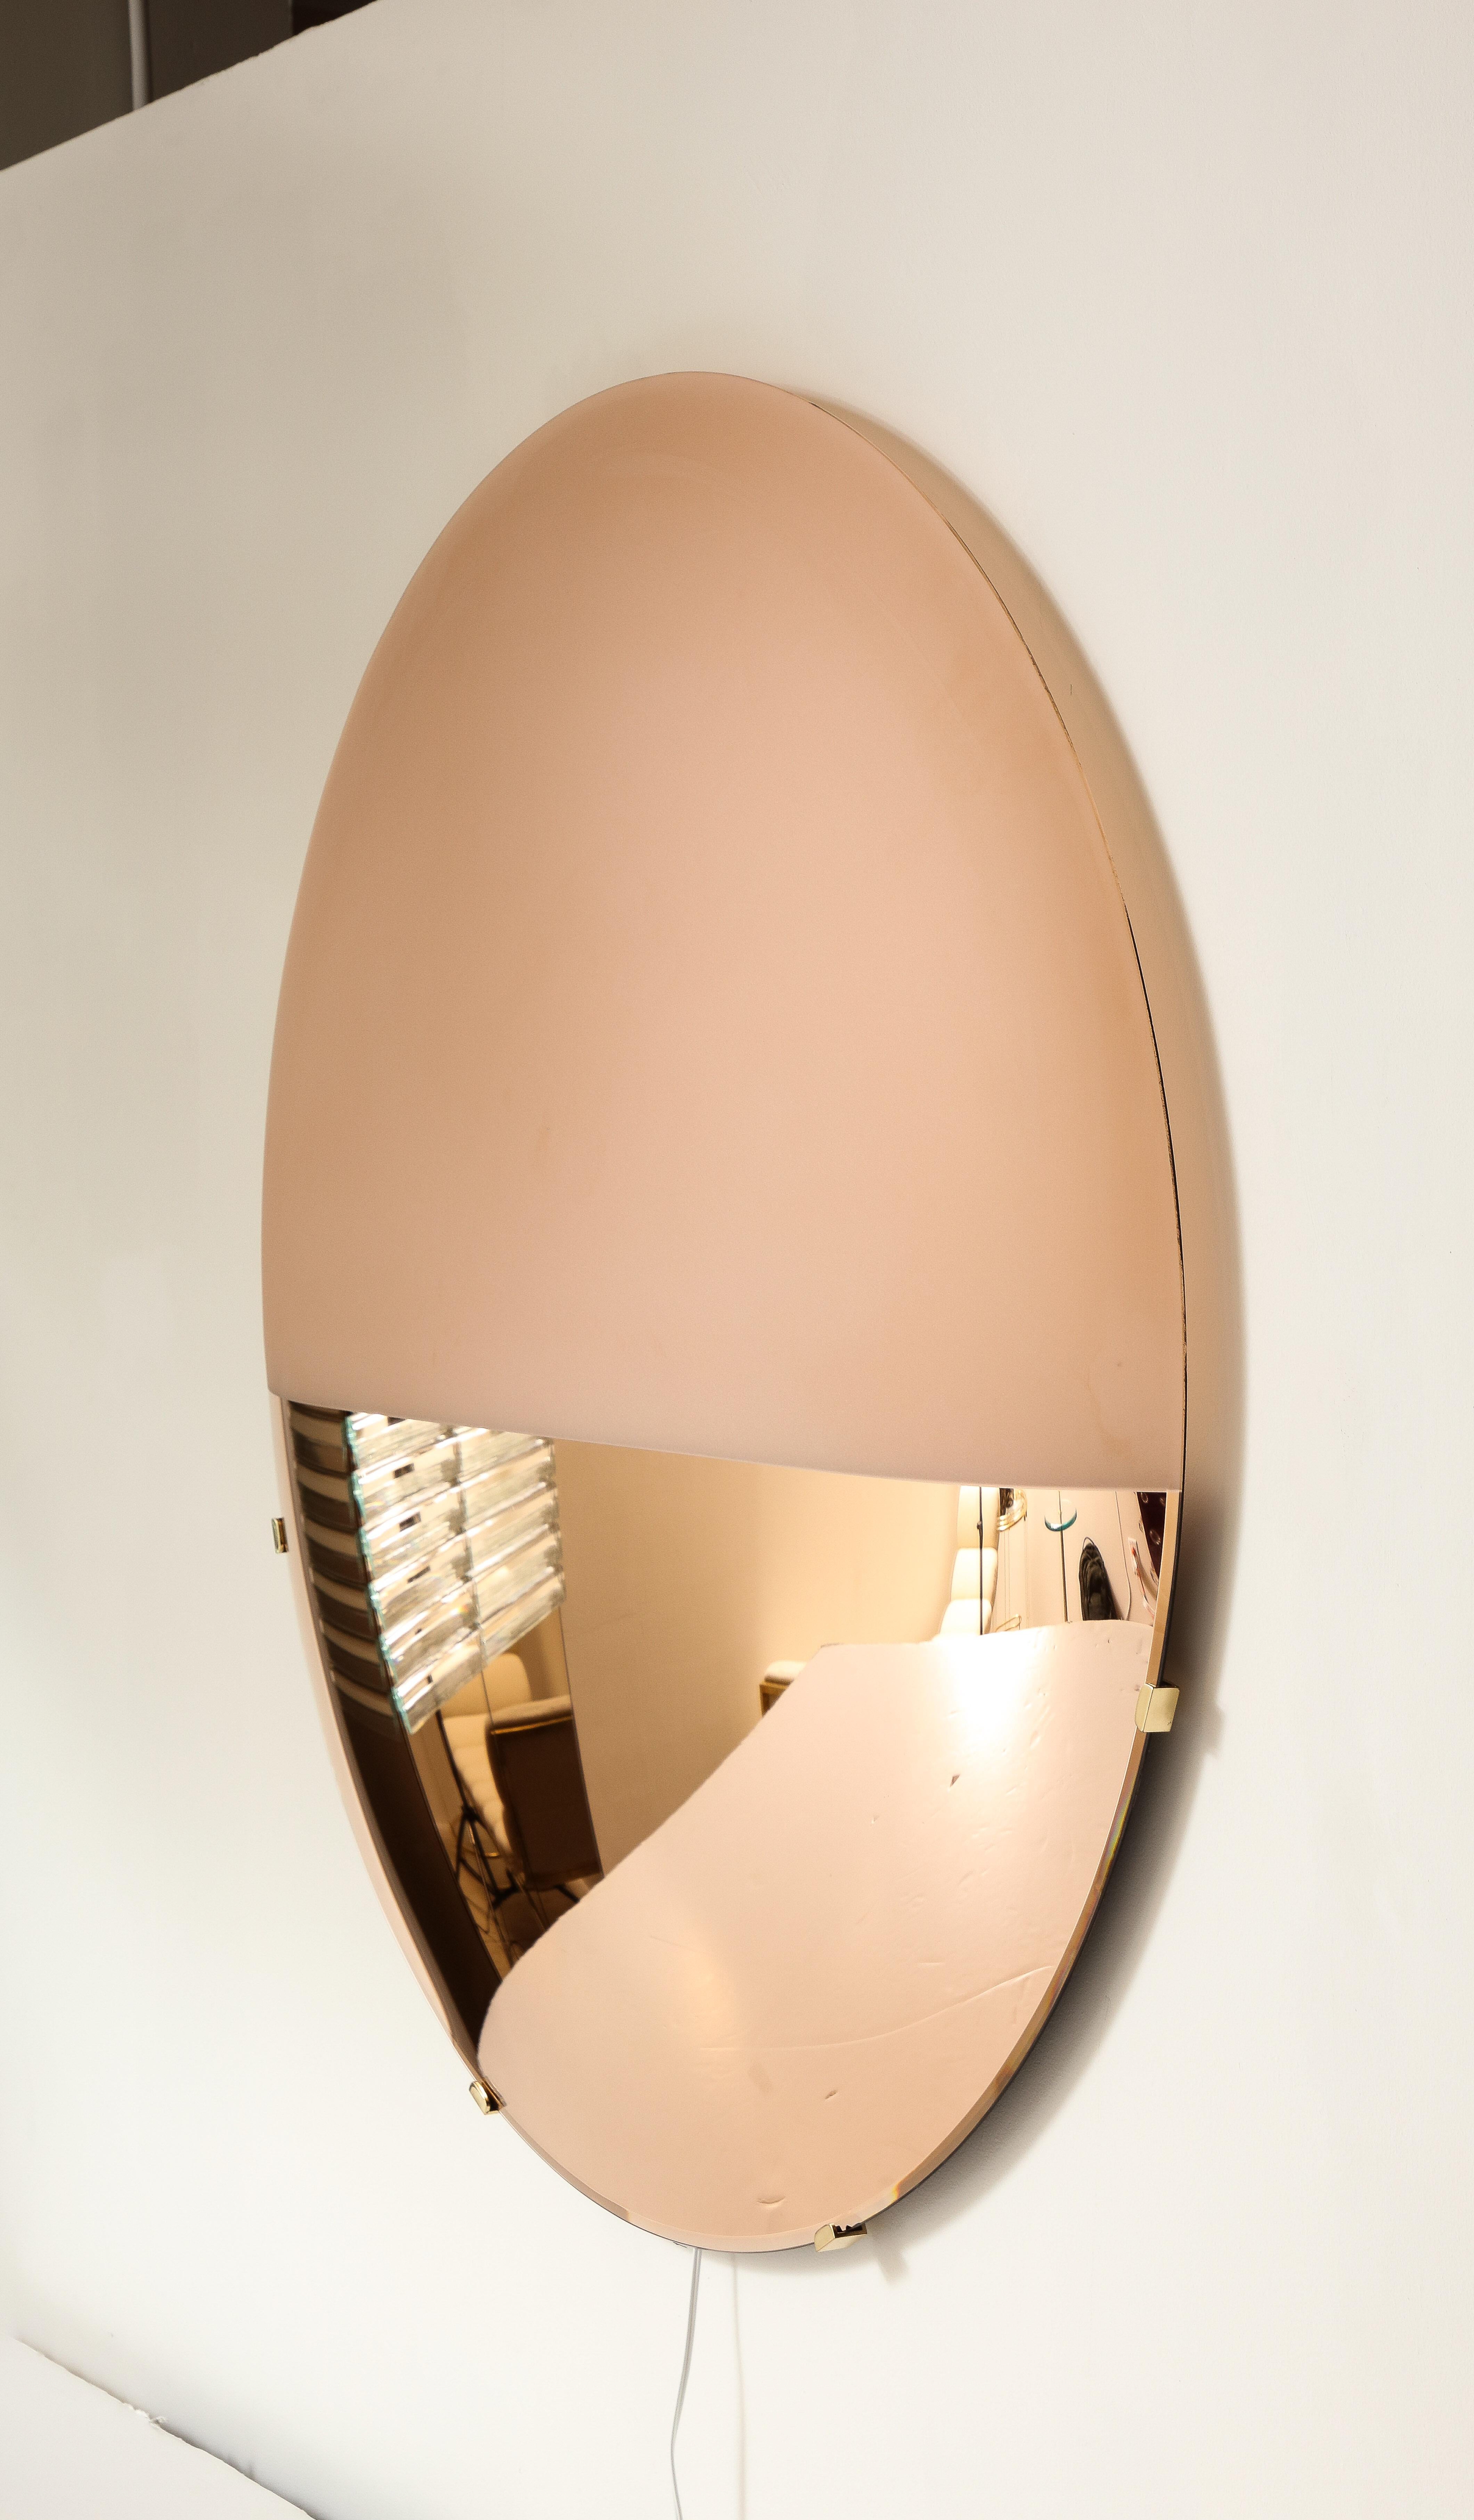 Hand-Crafted Large Sculptural Round Convex Rose Gold Lighted Mirror or Wall Art, Italy For Sale